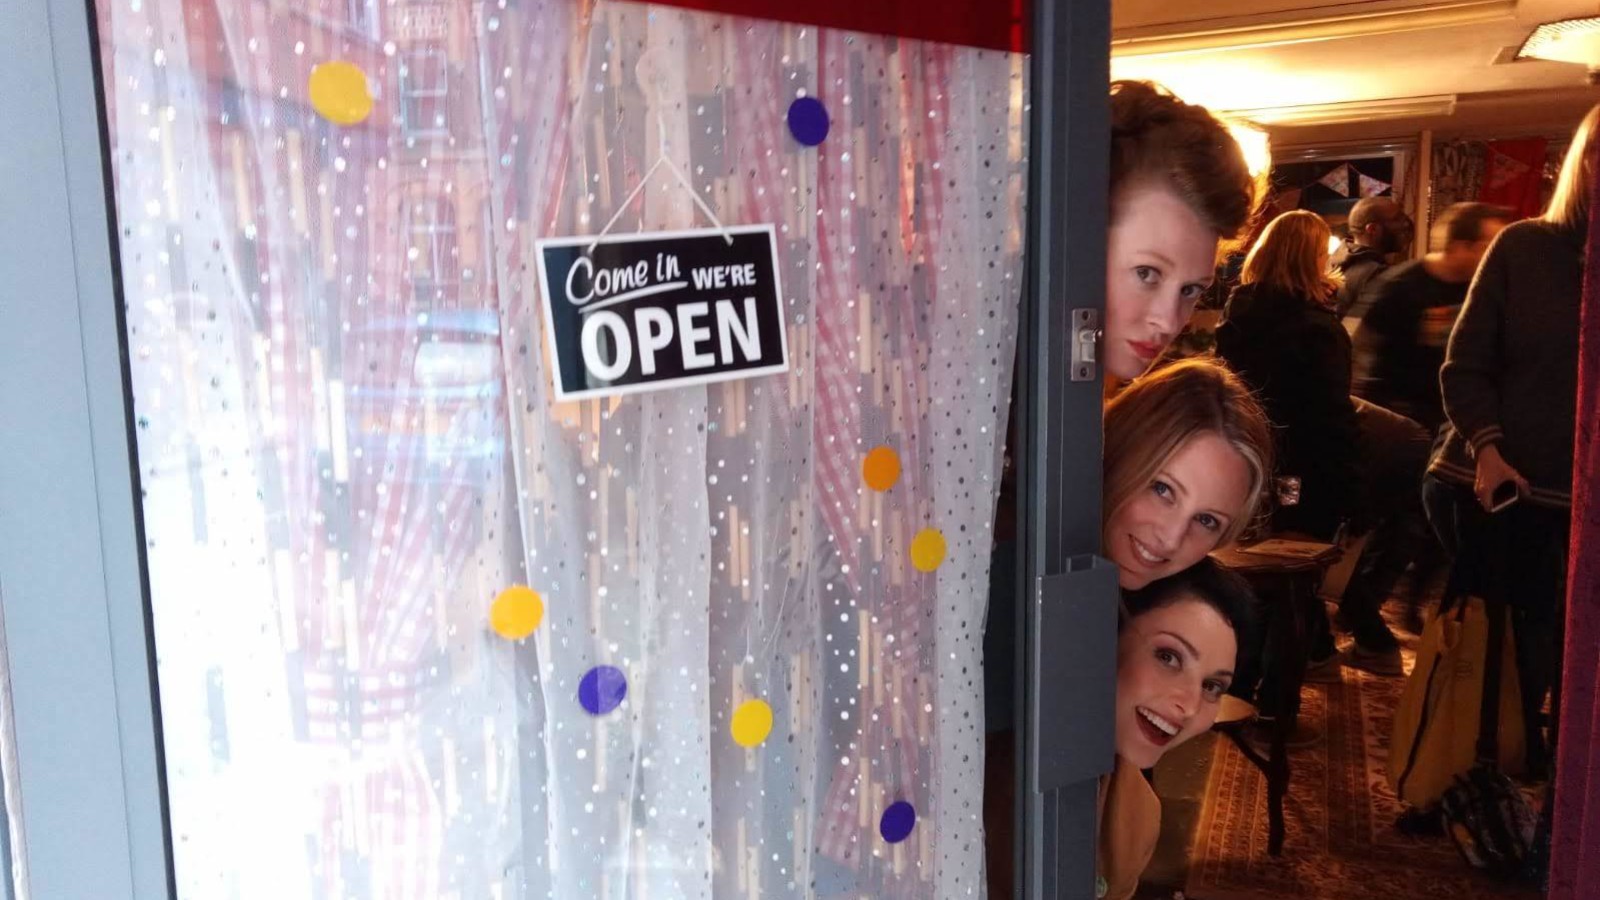 The artists peering around a glass door with the sign "come in, we're open" on it.